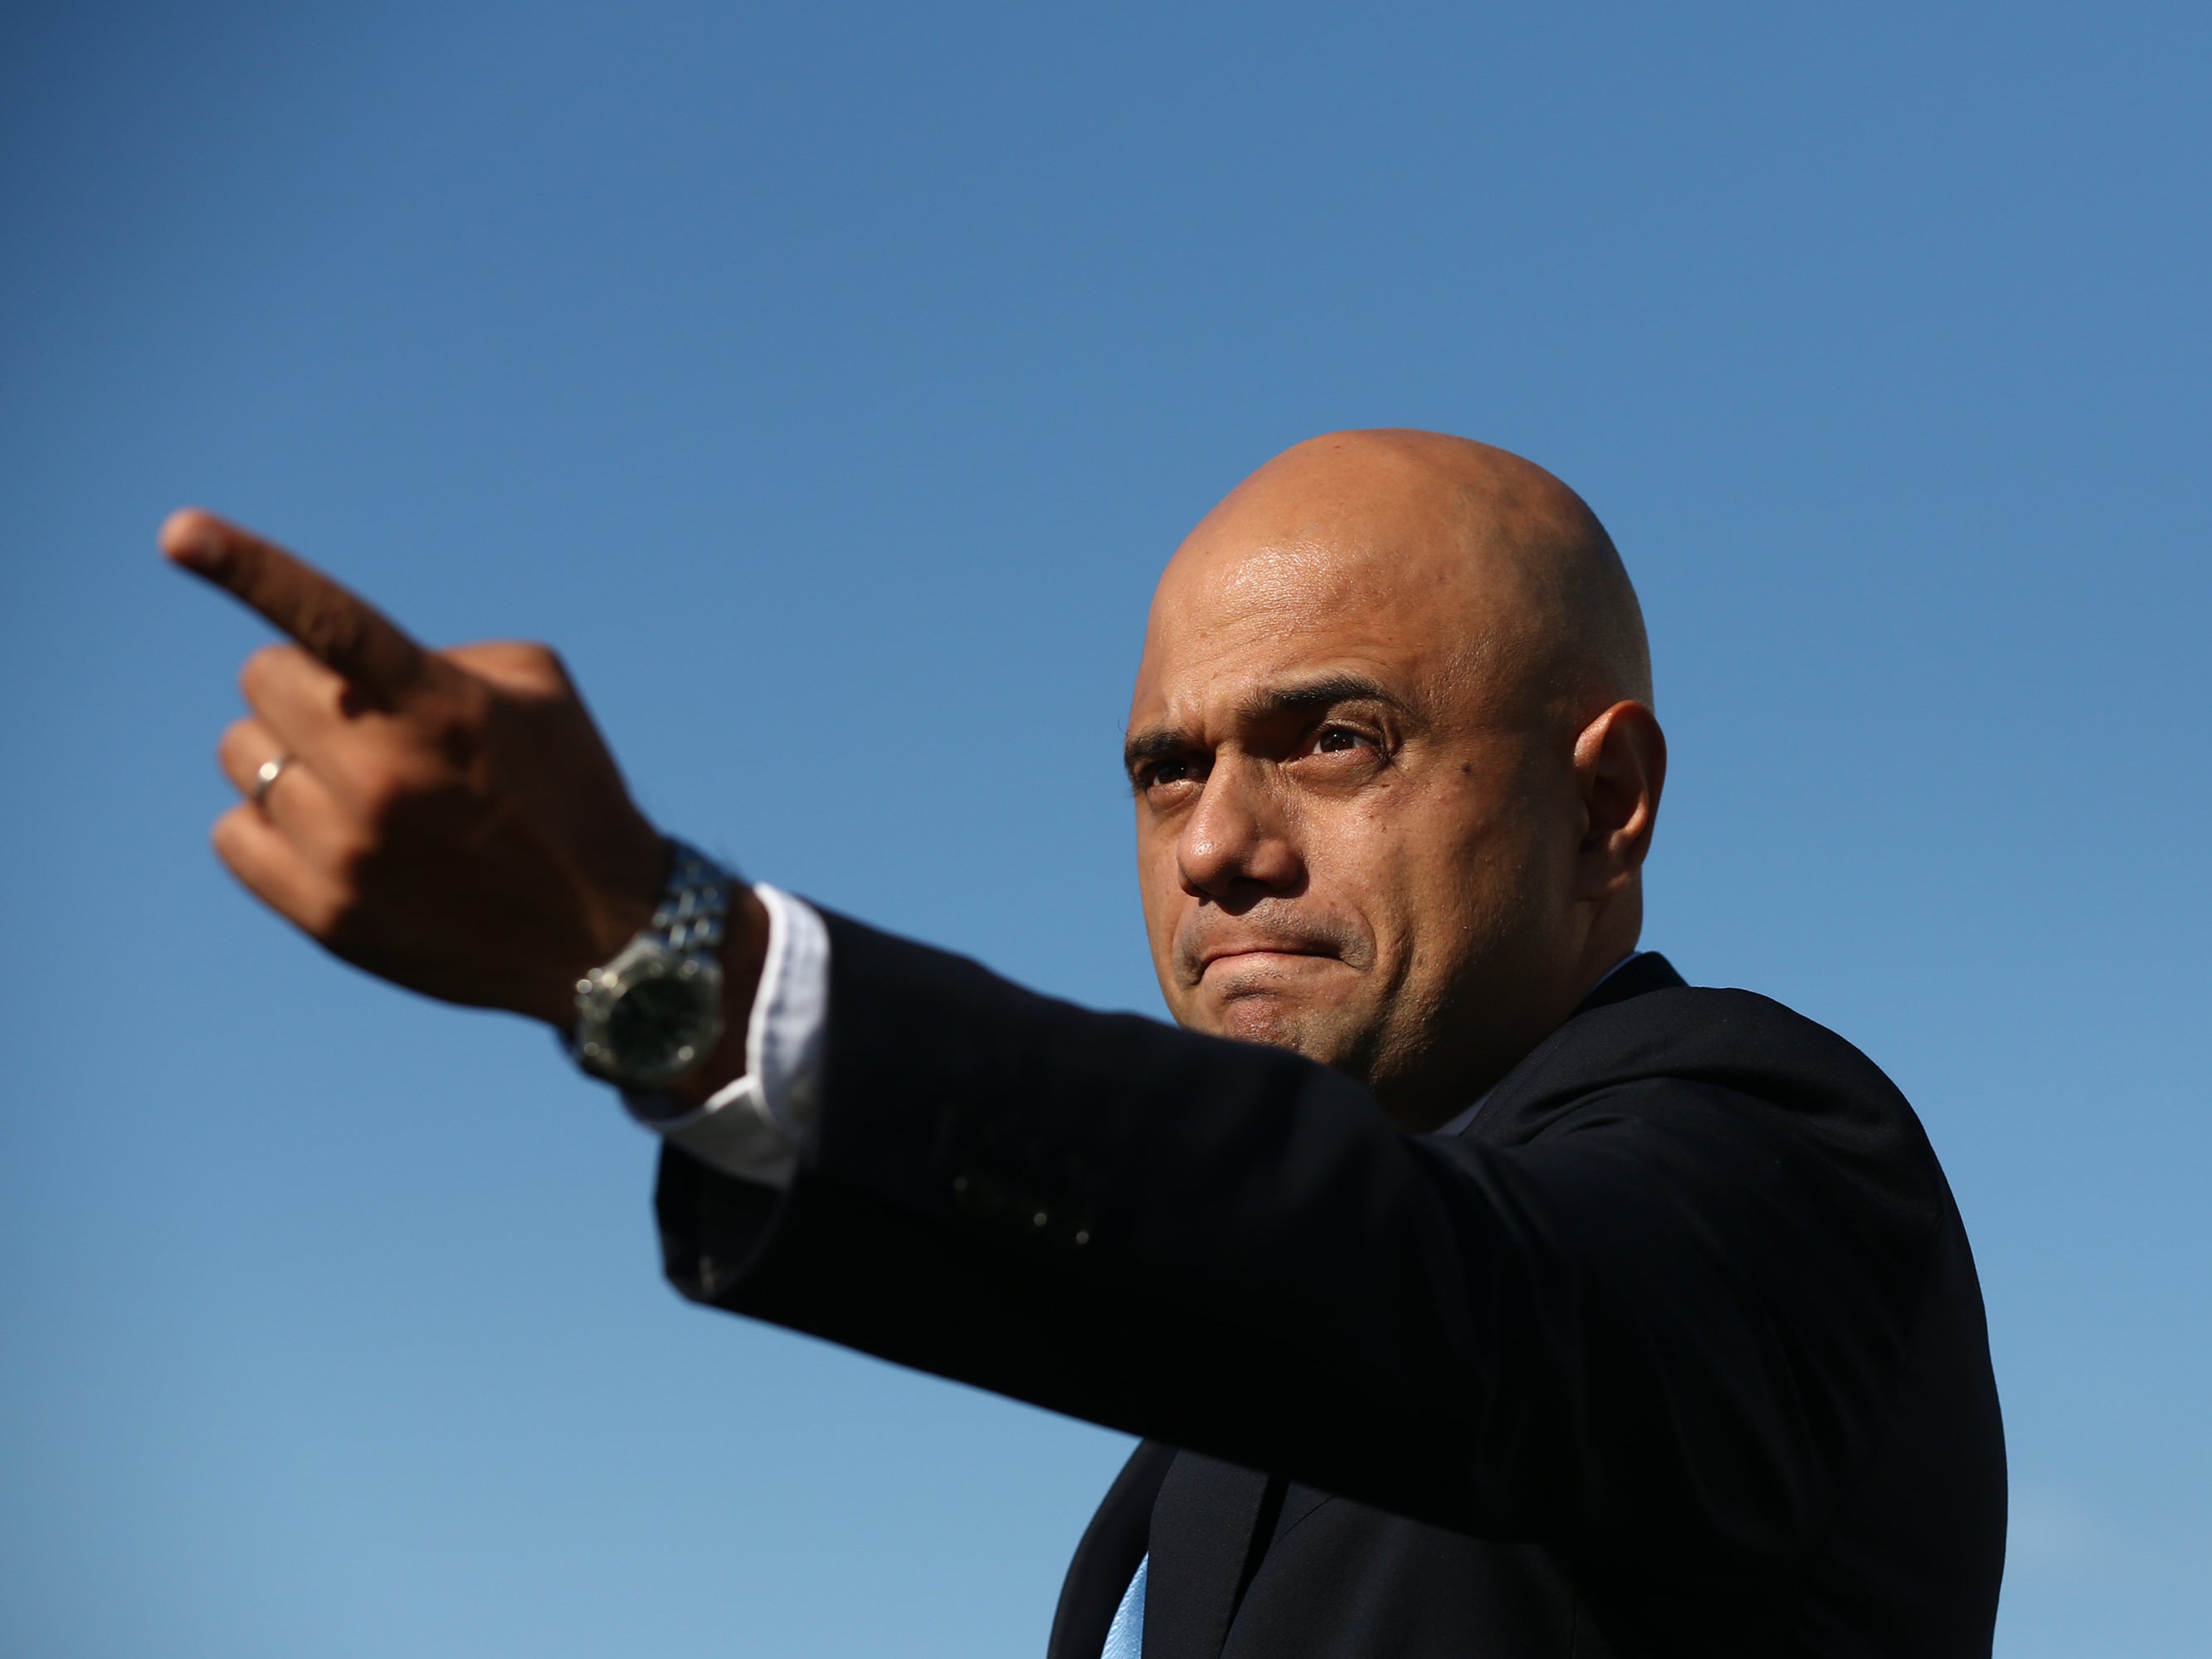 After a few rocky years with the PM, Javid returned during a very tricky time